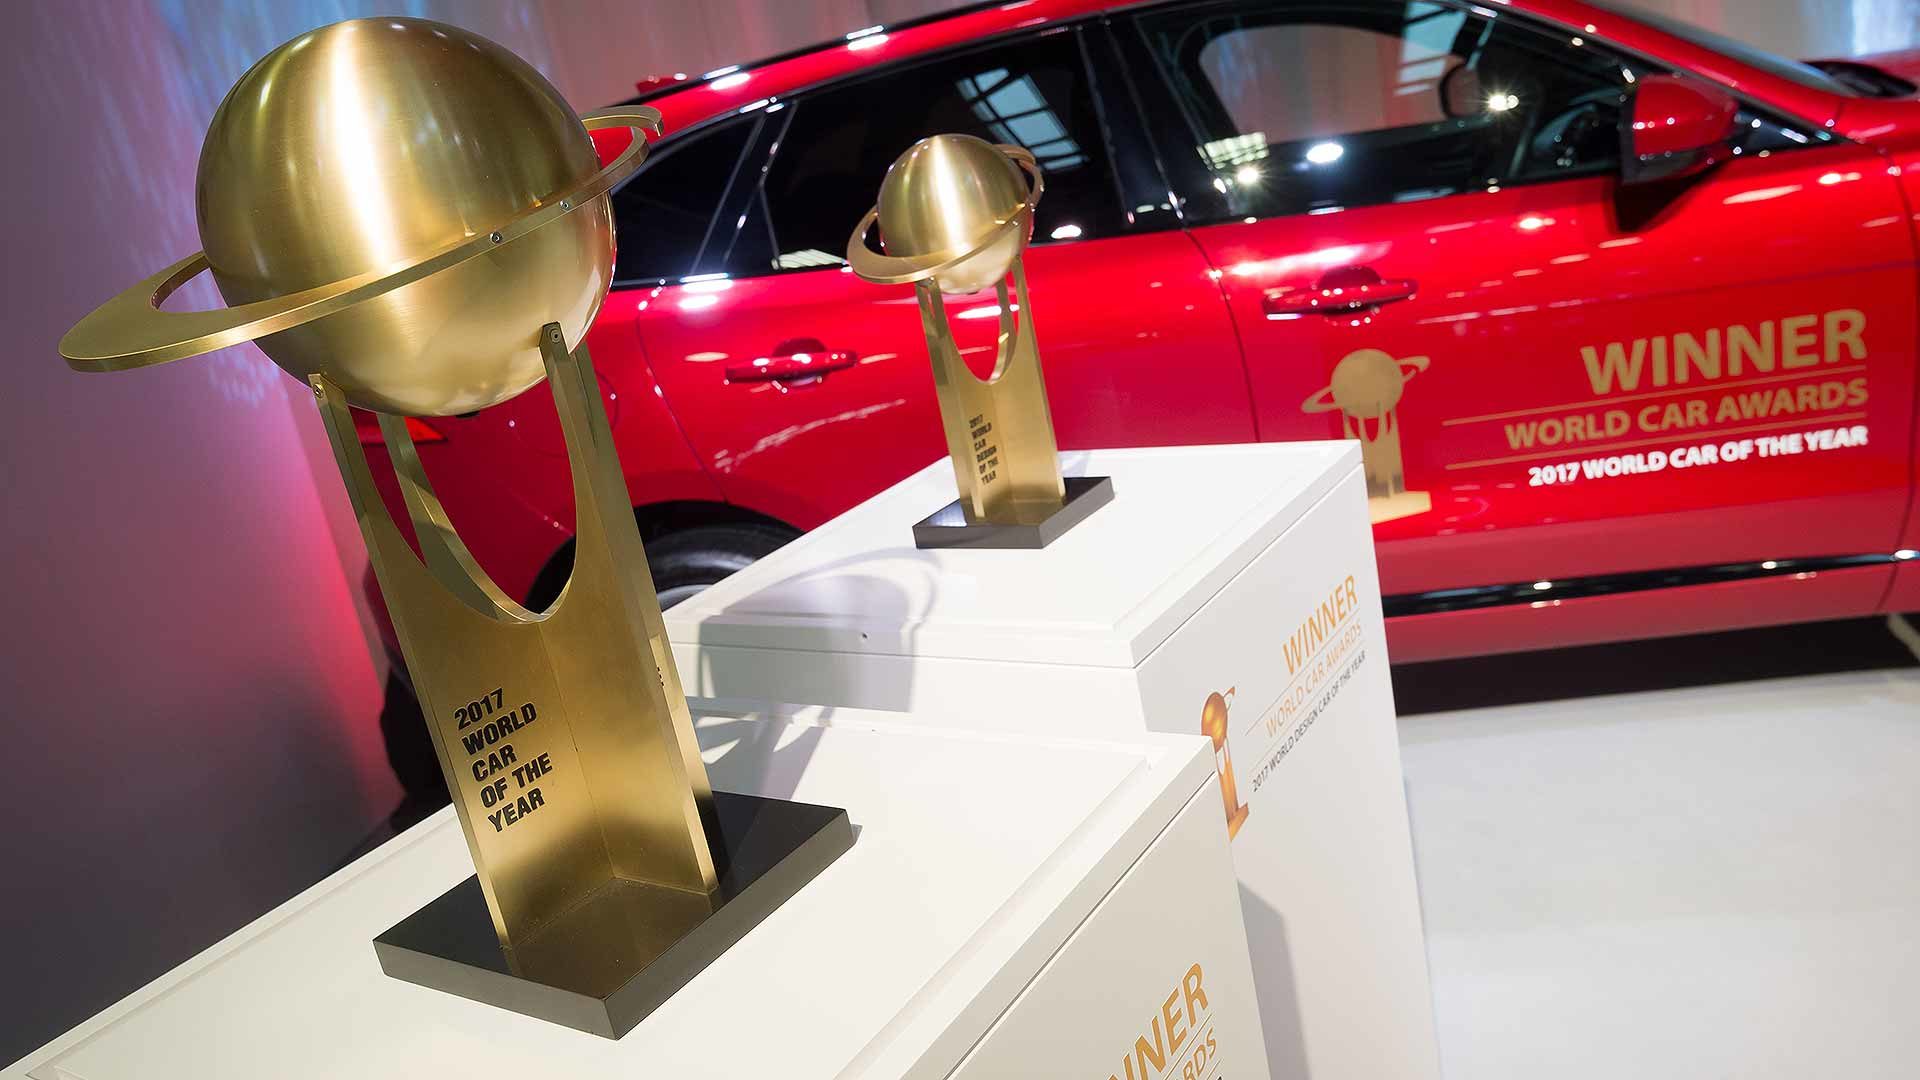 World Car of the Year trophy